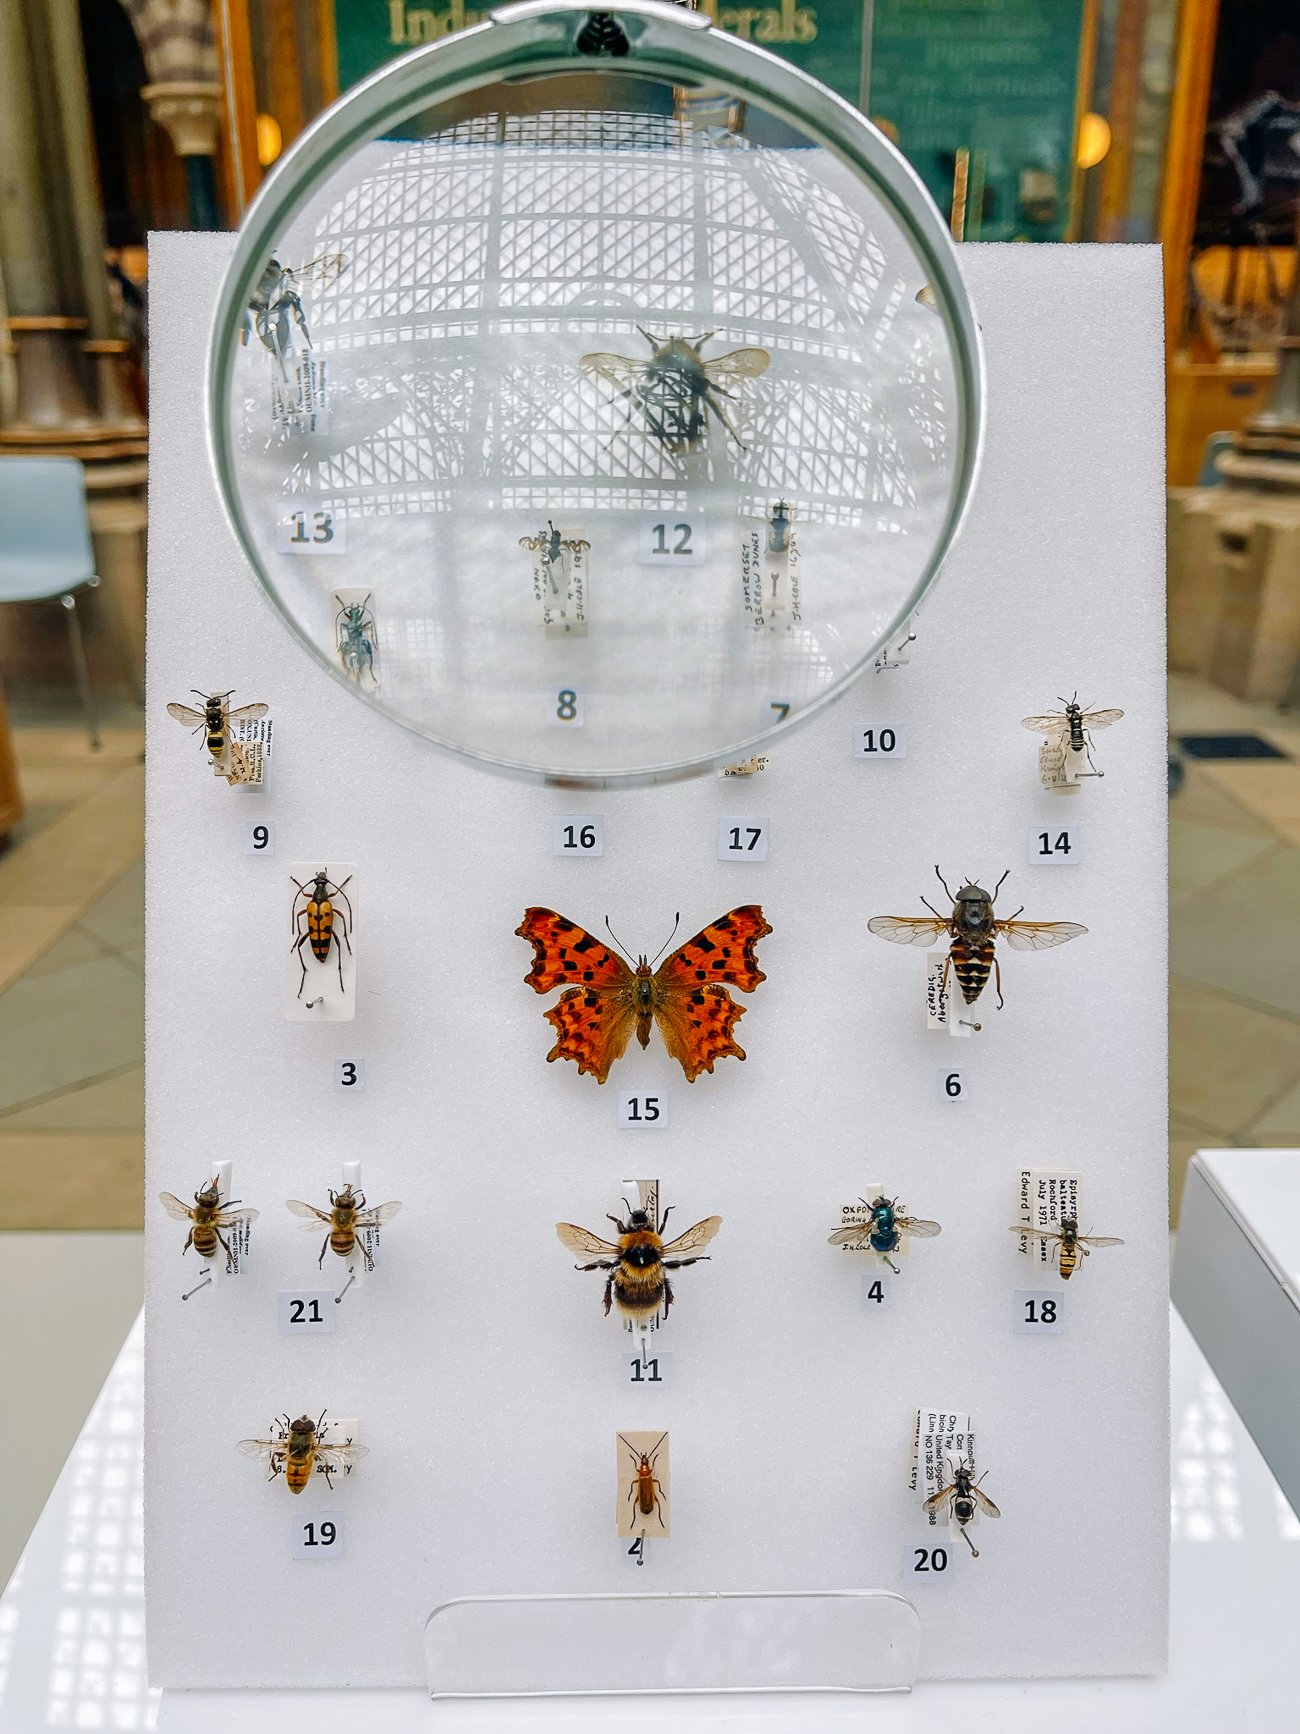 Butterfly and insect display at the Oxford Museum of Natural History